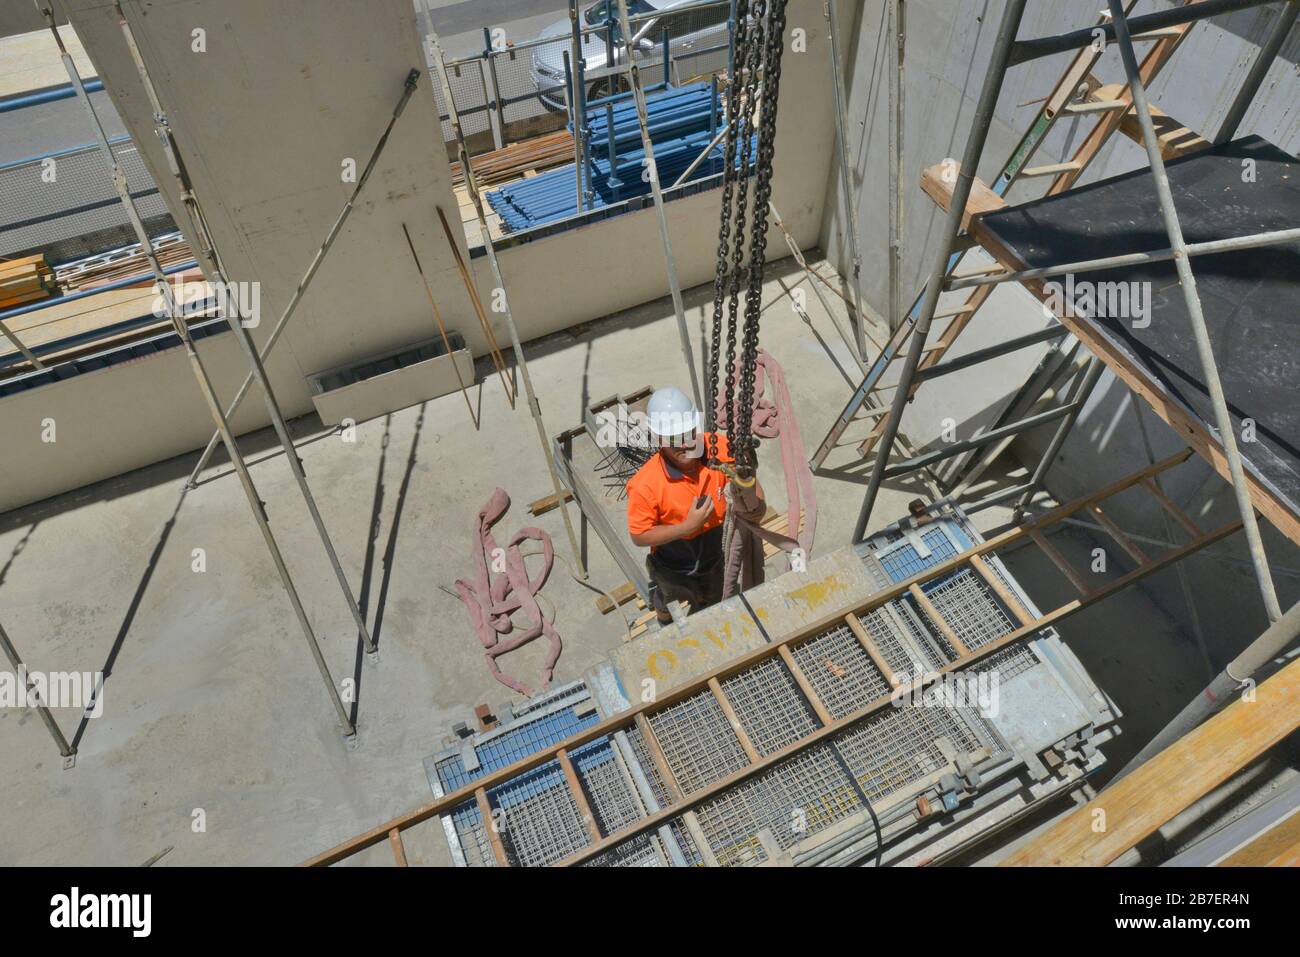 Tradesman at work on a new architectural project, wearing high visibility shirt, boots, helmets and kneee pads. Stock Photo